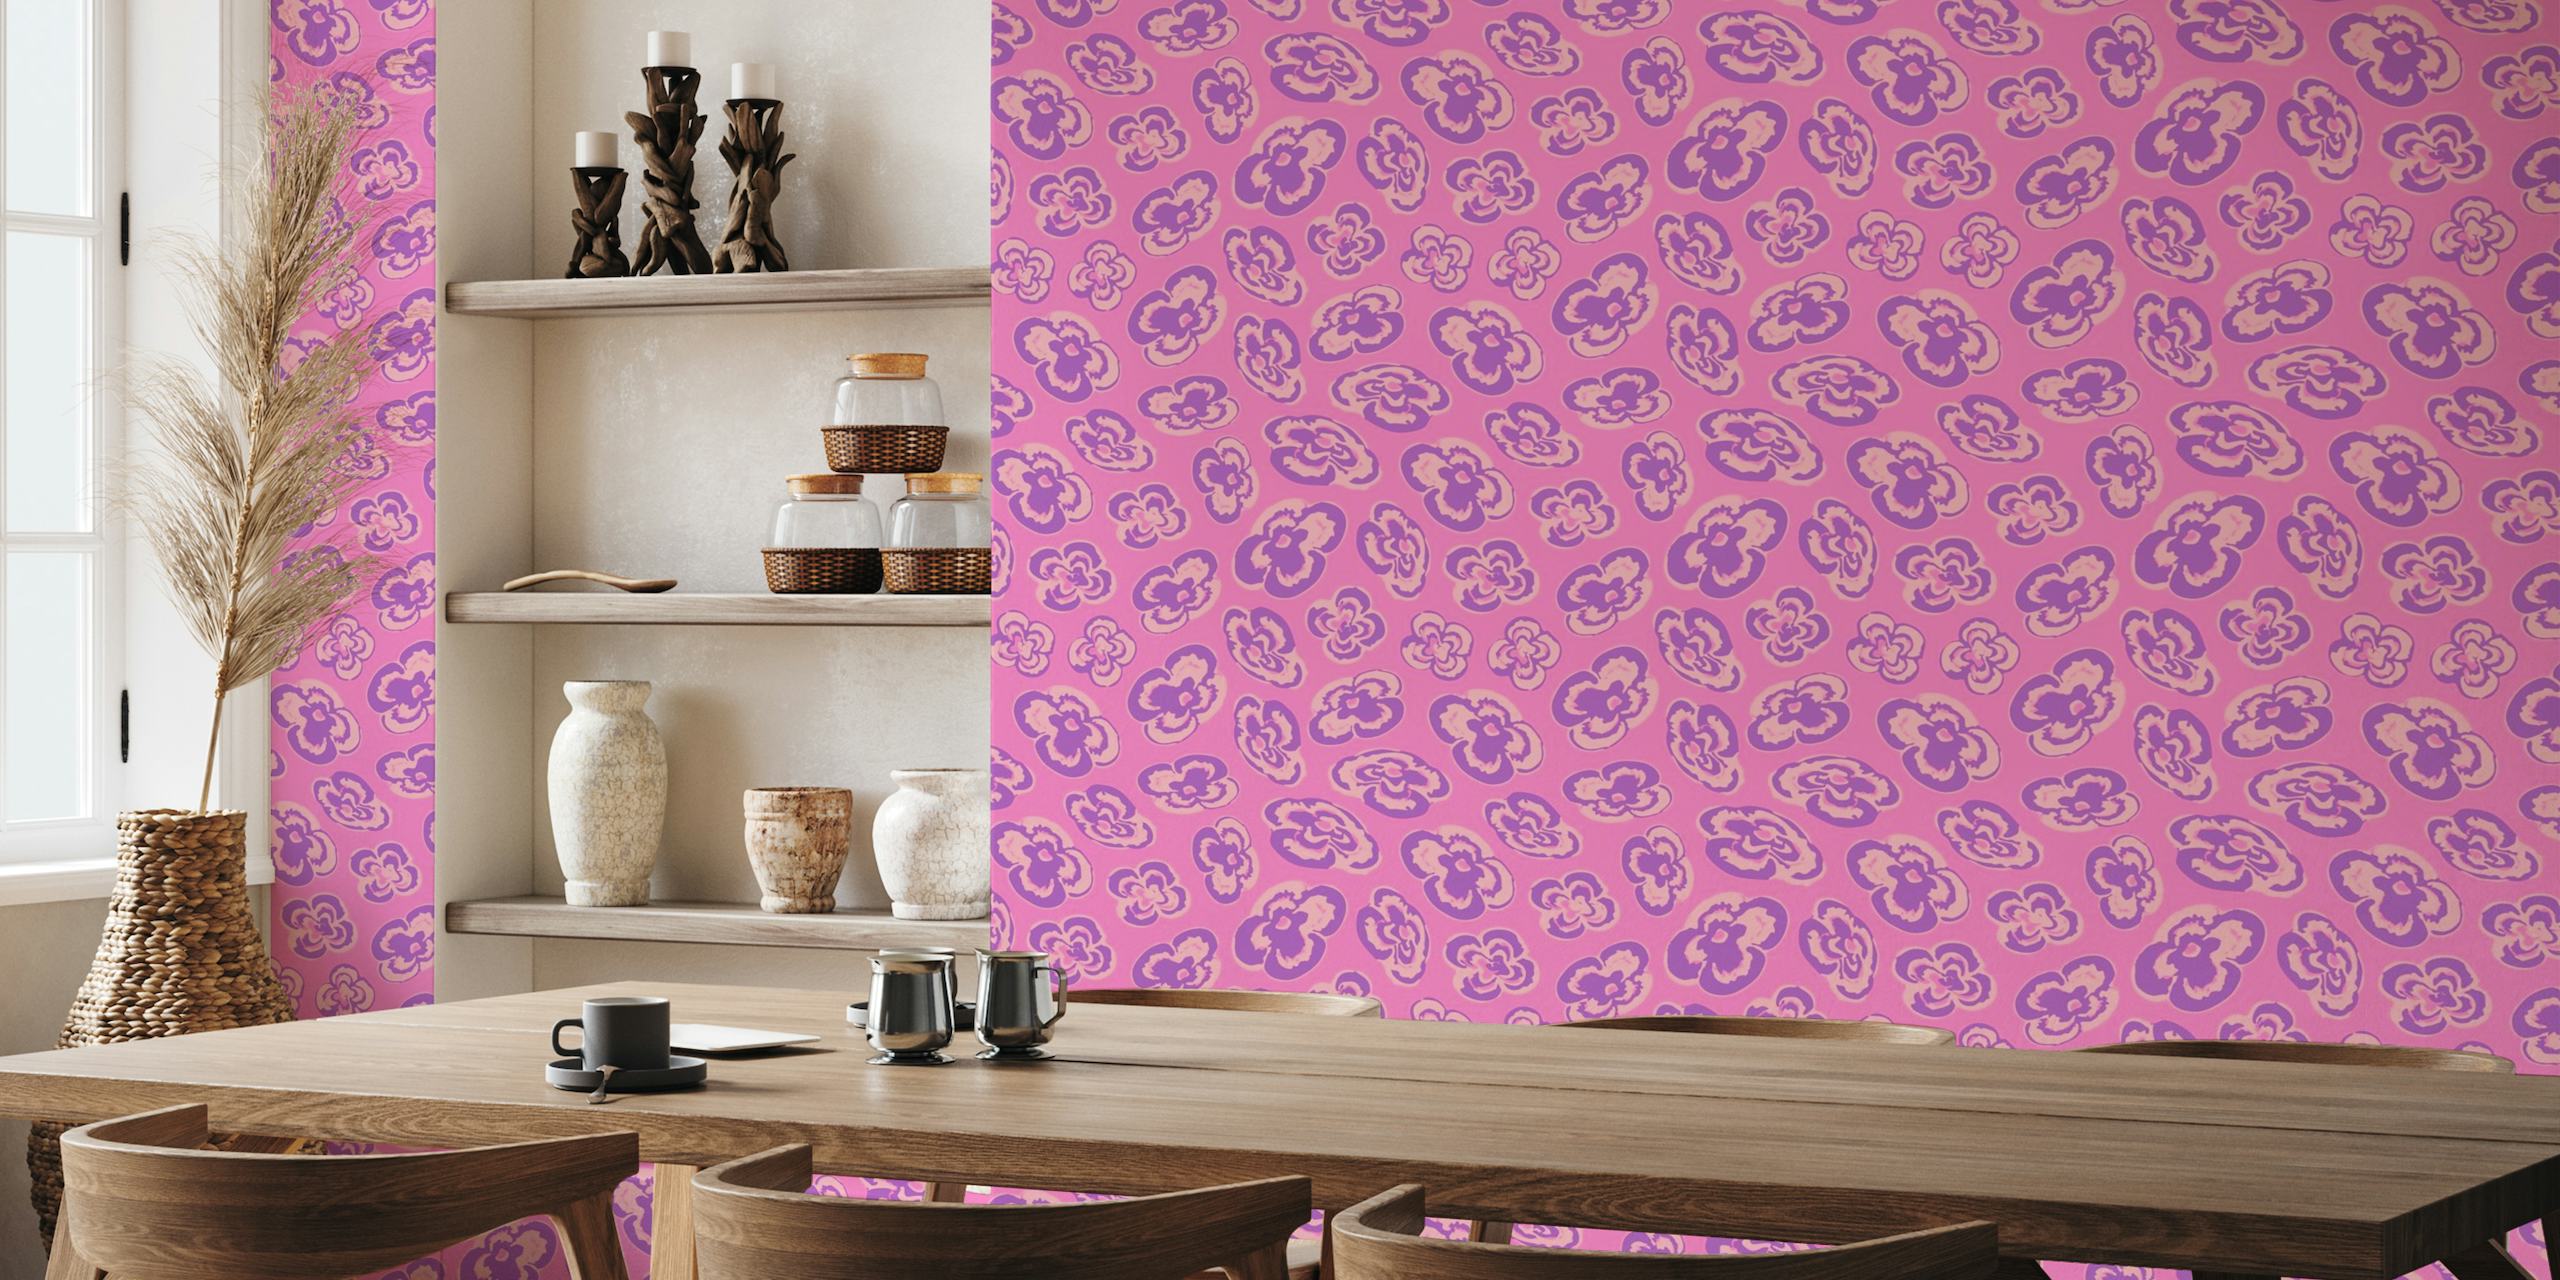 FLOATING LILIES Abstract Floral - Purple Pink behang